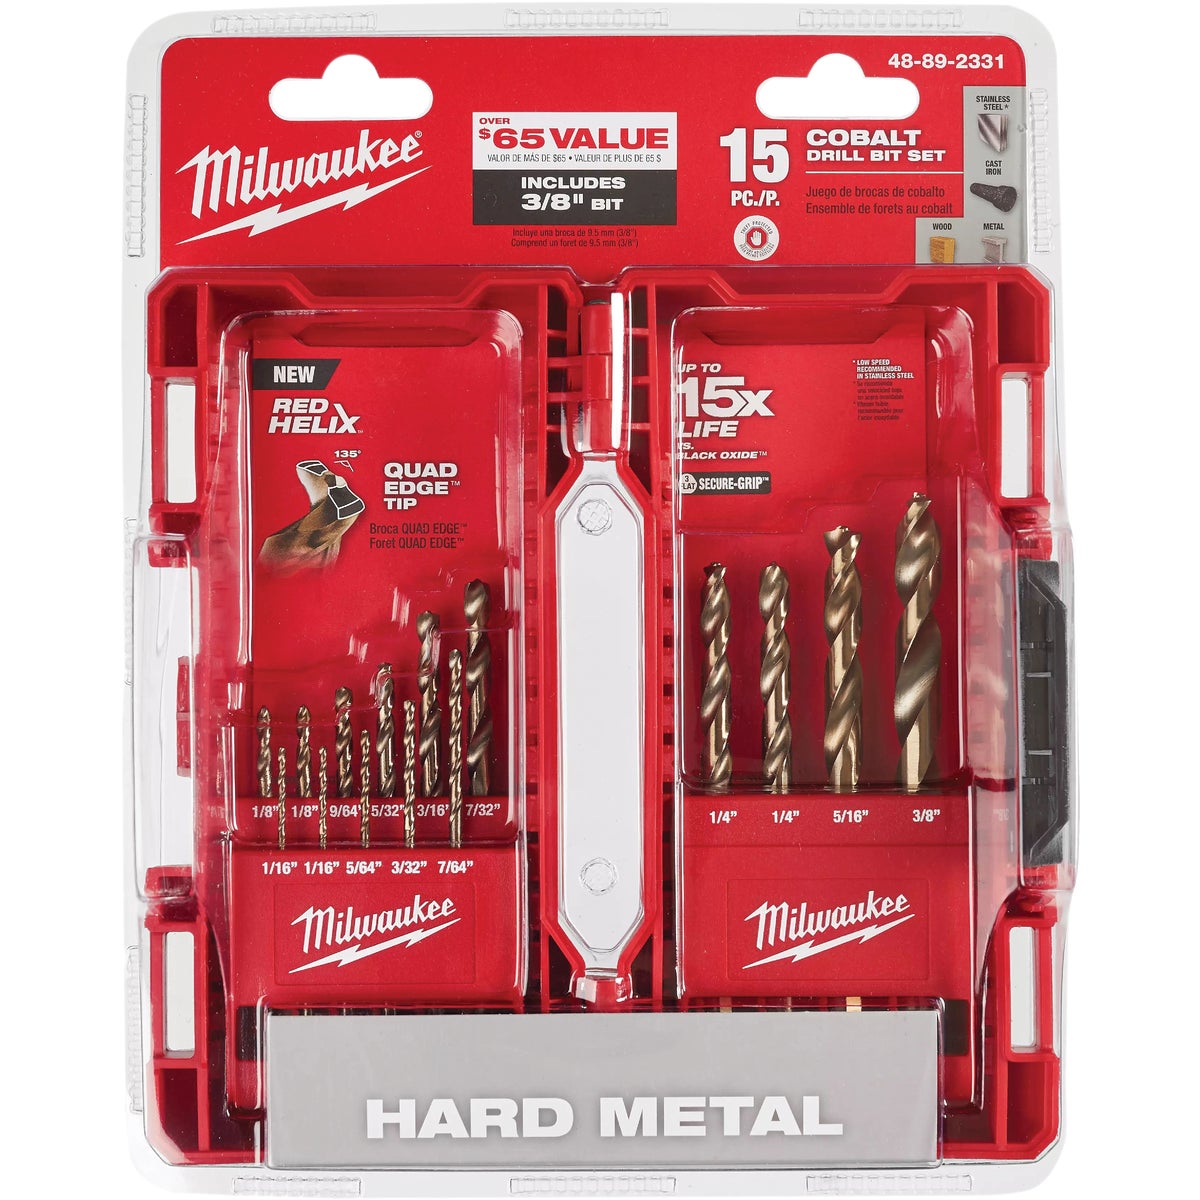 Item 338176, The MILWAUKEE RED HELIX 15PC Cobalt Drill Bit Set is engineered for extreme